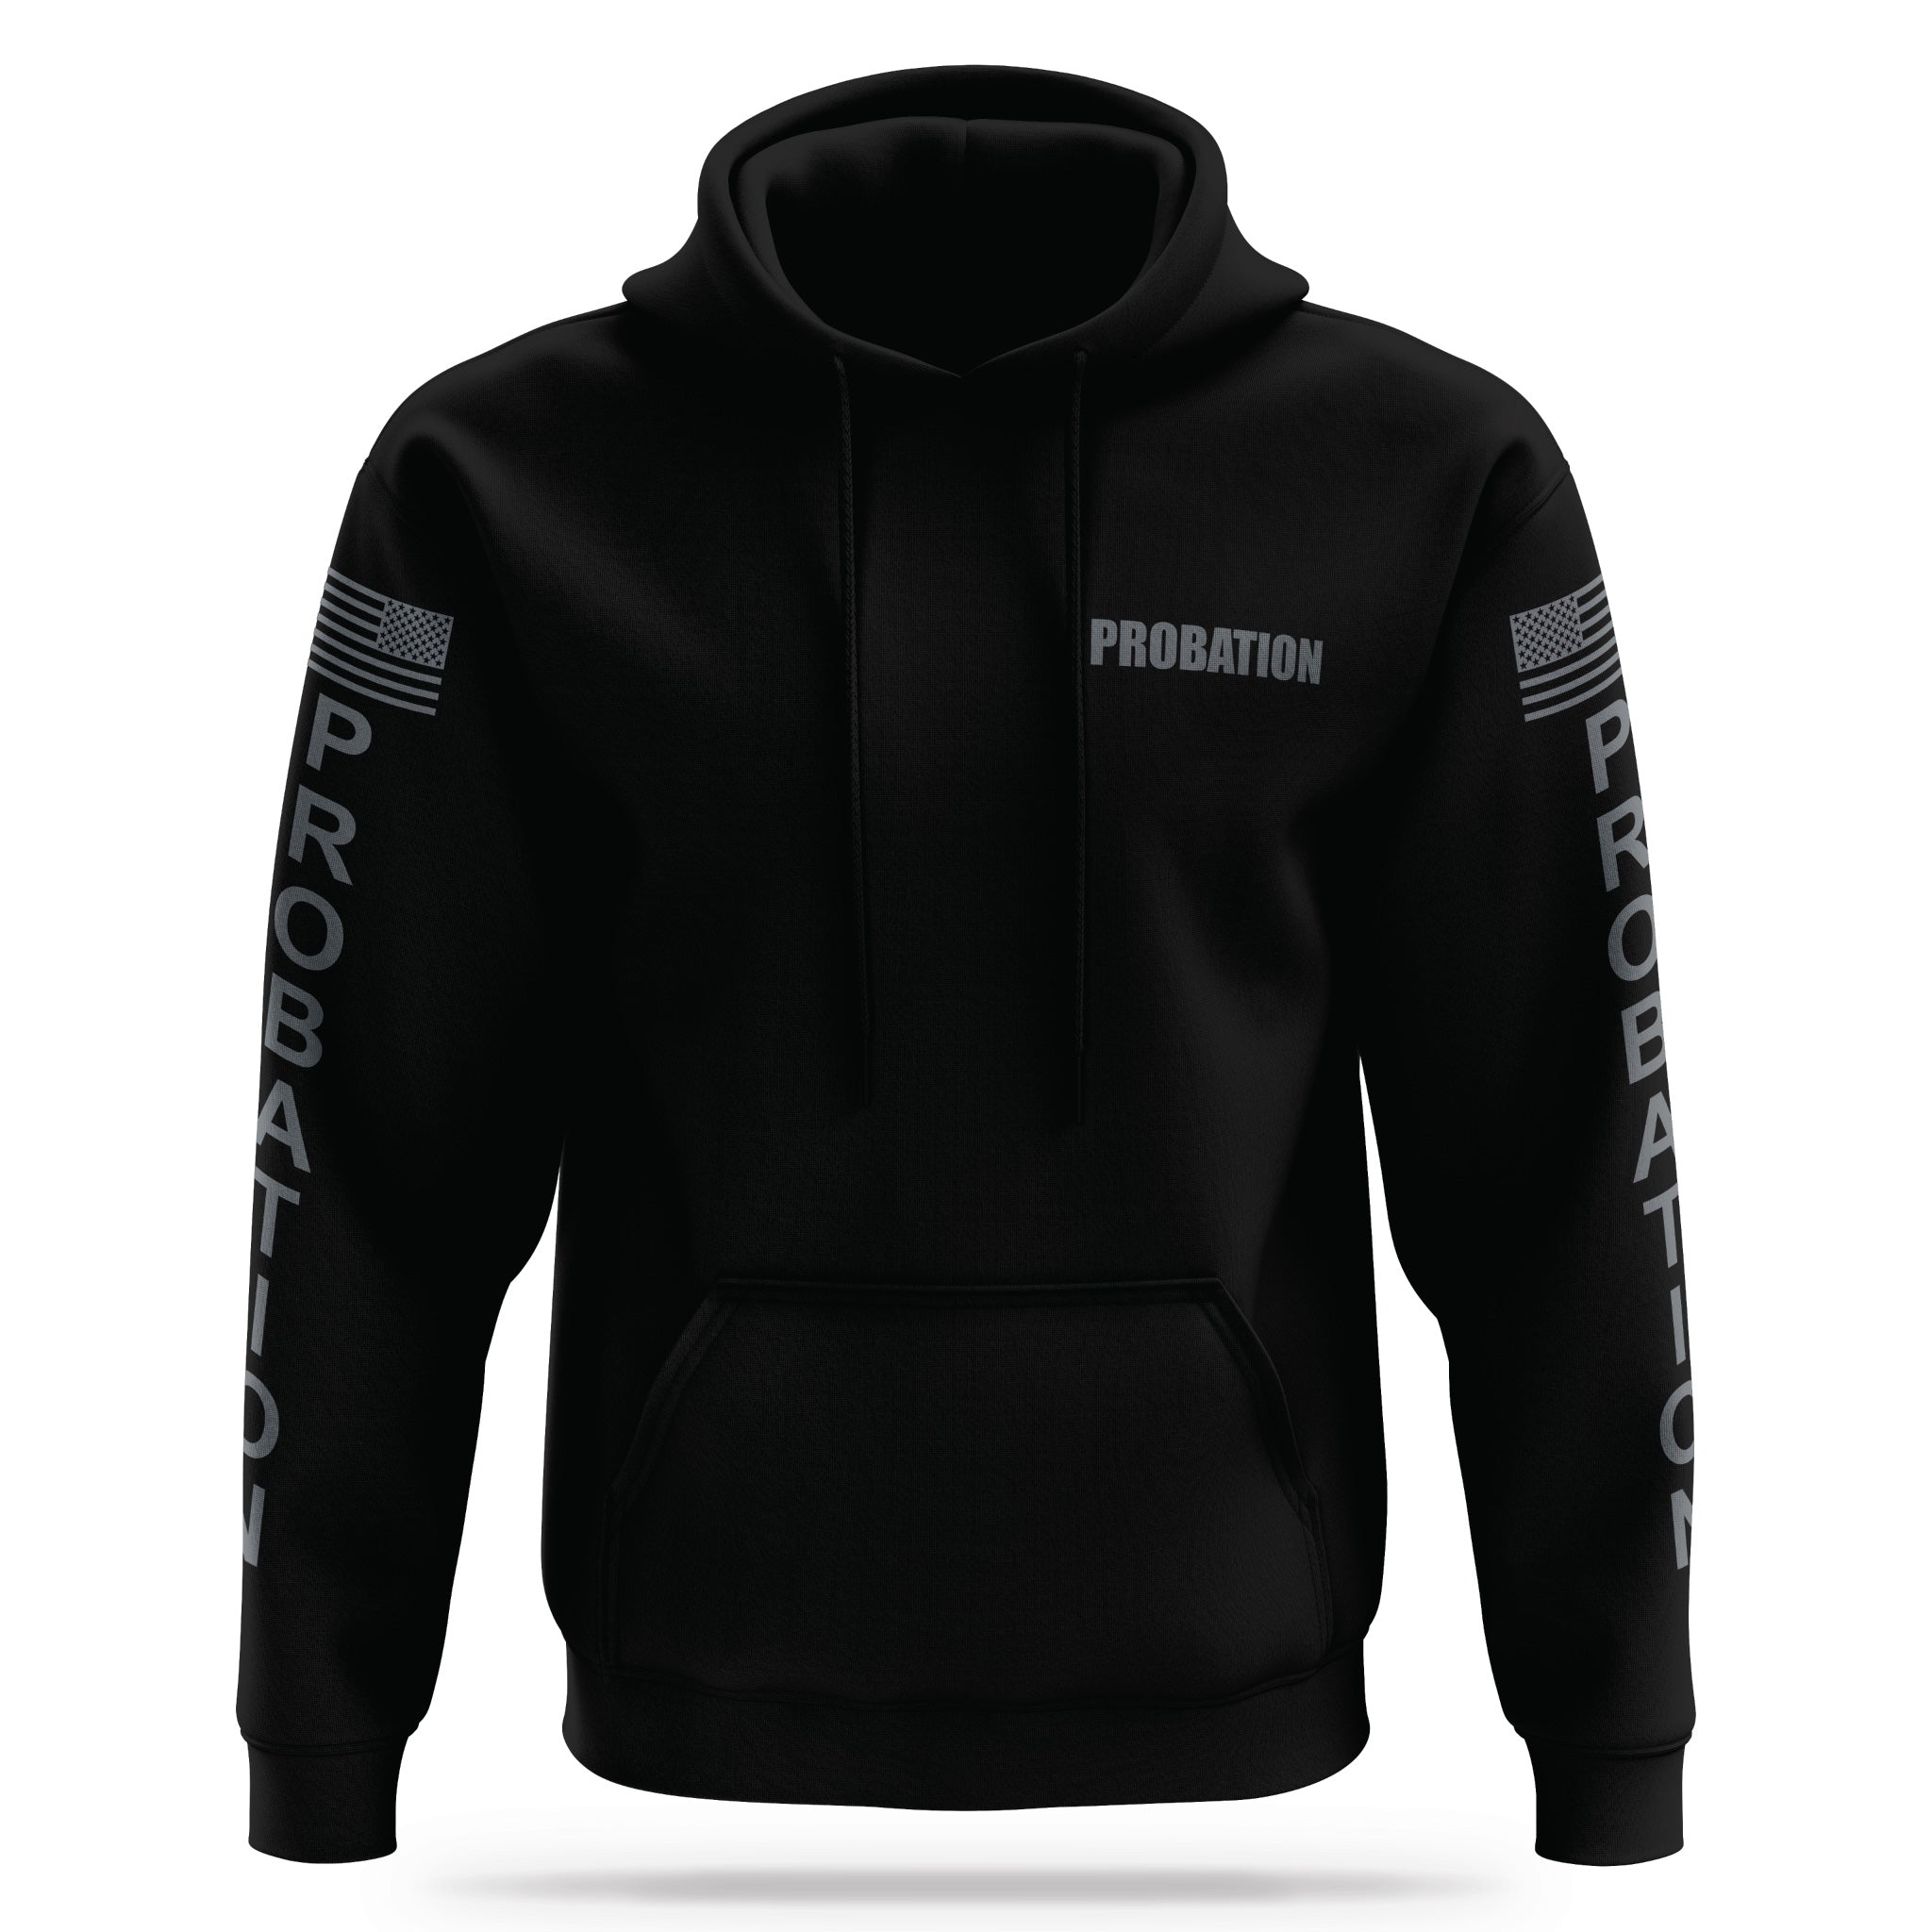 Probation Performance Hoodie 2.0 BLK/GRY | XL | Hoodie | Leo Owned & Operated Business | Designed in The USA | 13 Fifty Apparel